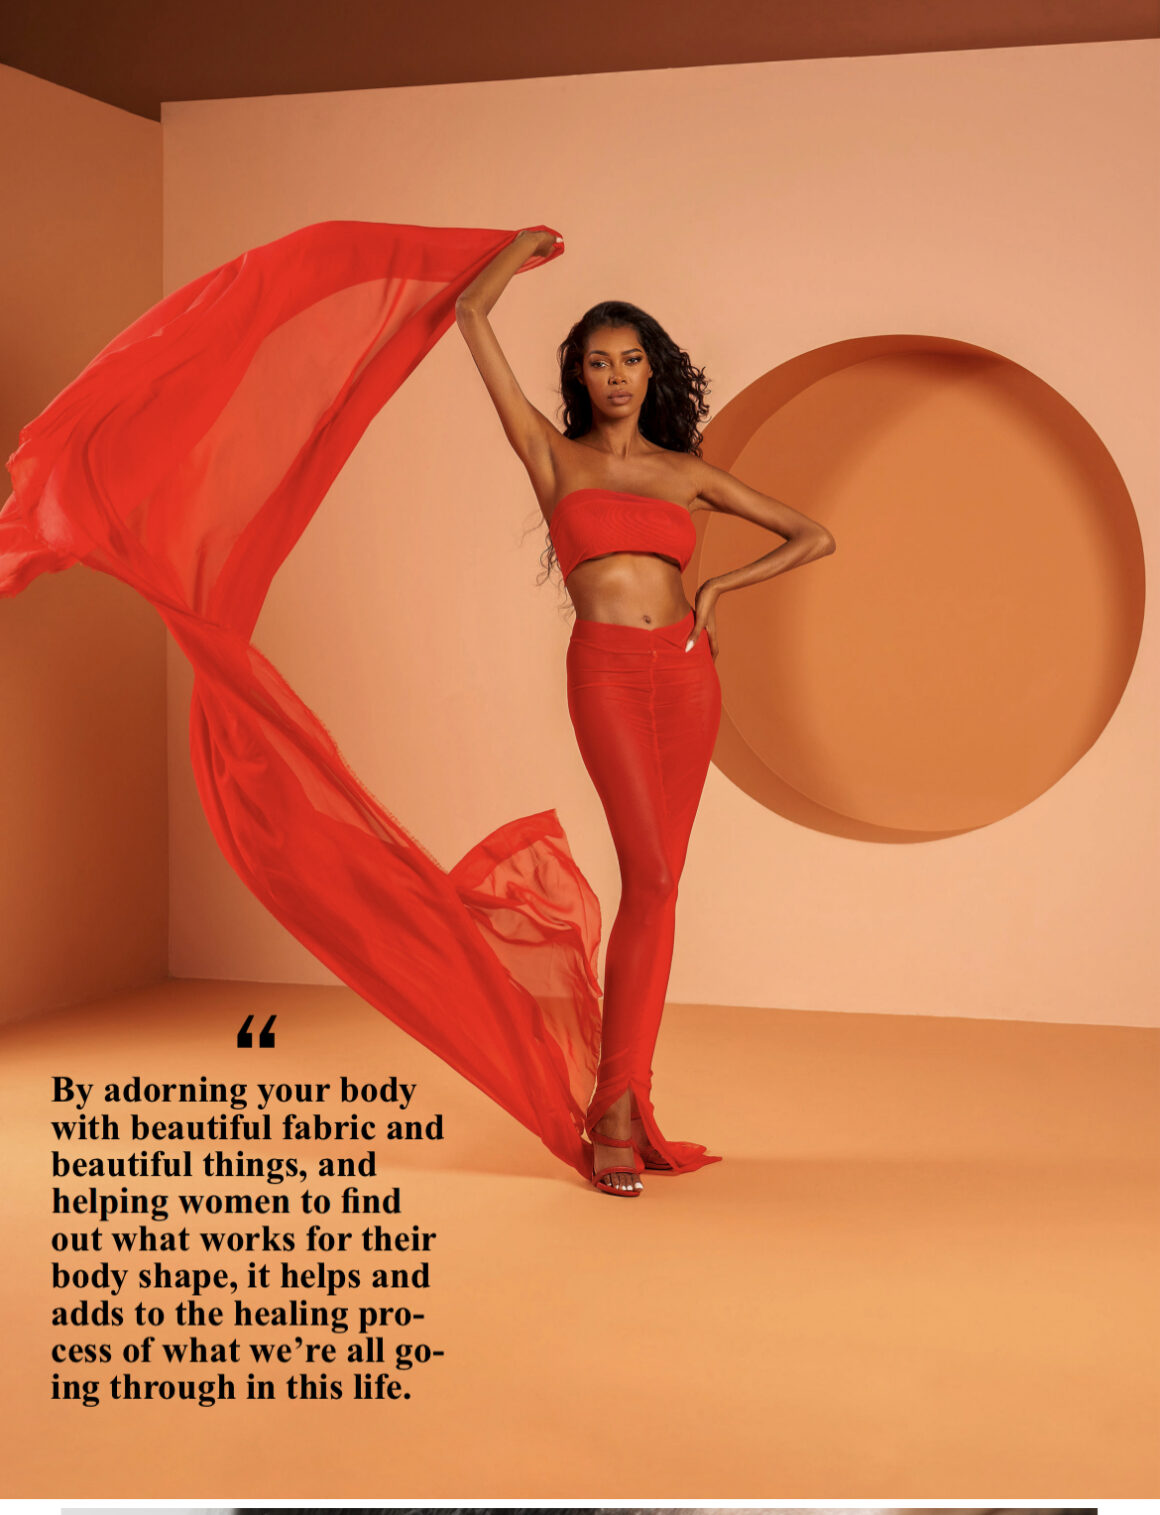 Fashion News Fashion Bomb Daily Releases Our First Magazine With Supermodel Jessica White as the Covergirl in Fashion Bomb Daily Shop 8